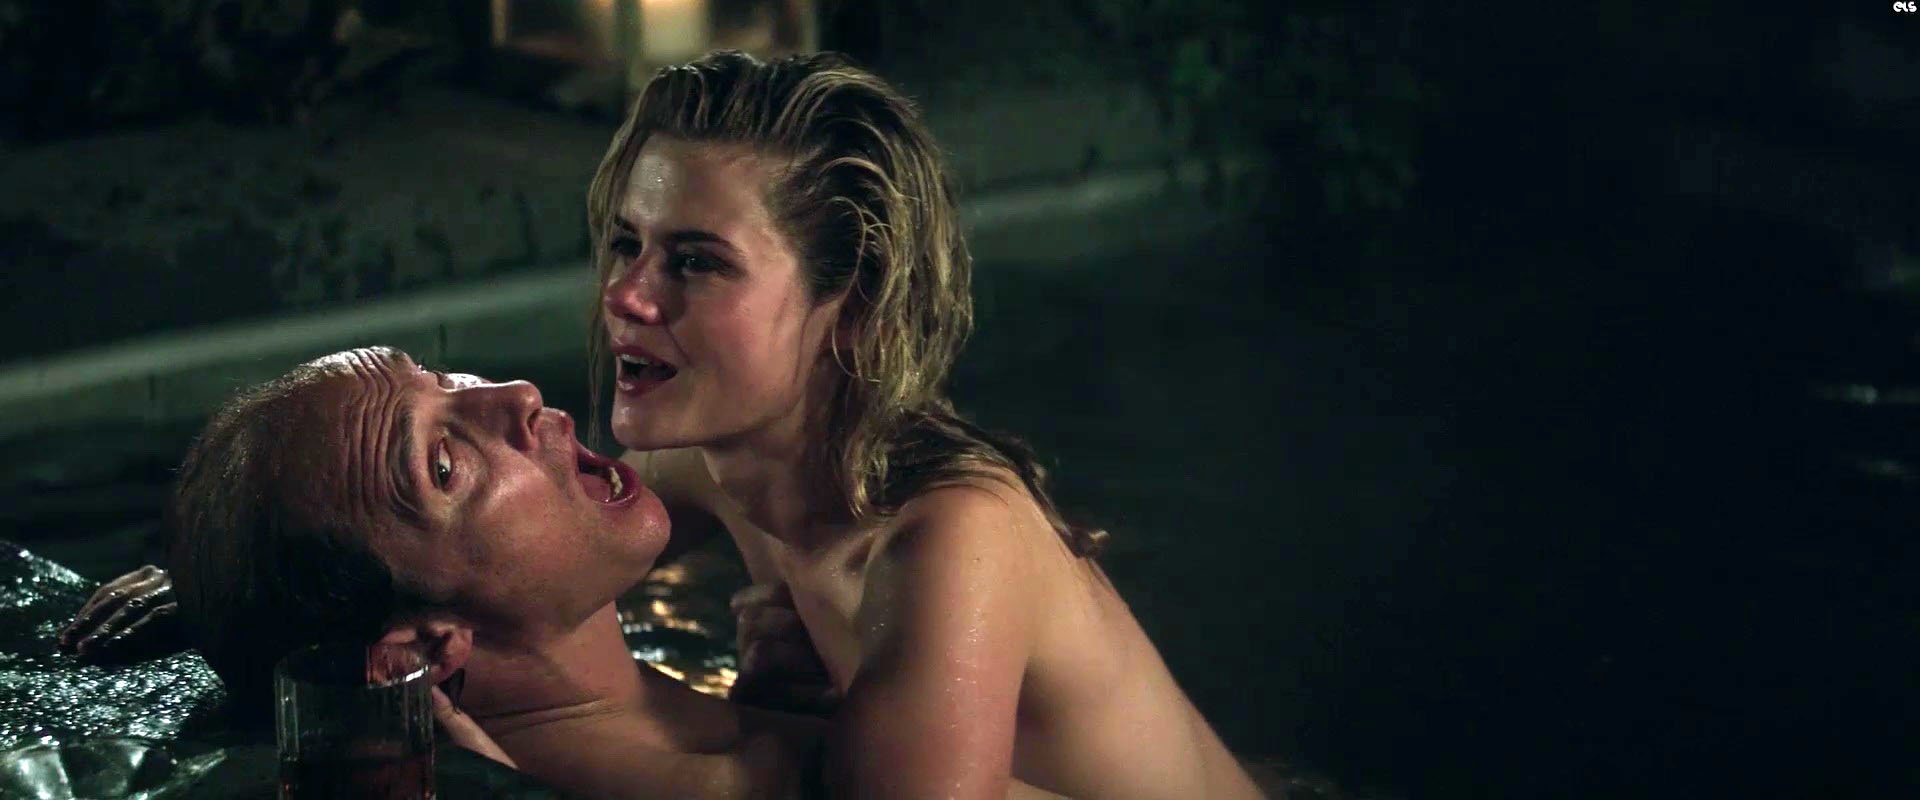 Nude Video Celebs Rachael Taylor Sexy Gold 2016